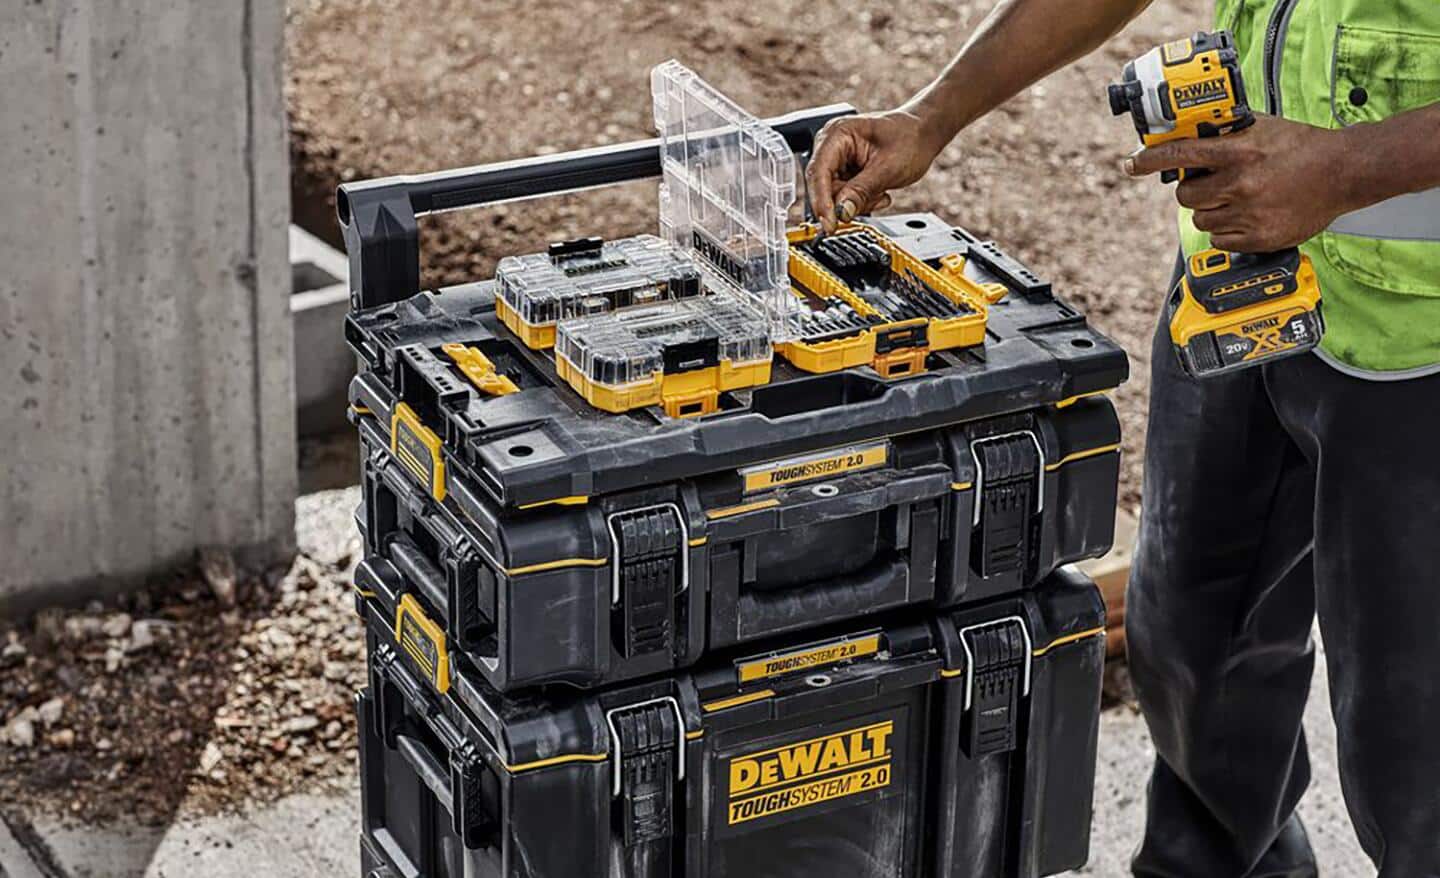 A man takes a drill bit out of case resting on a stack of tool boxes.